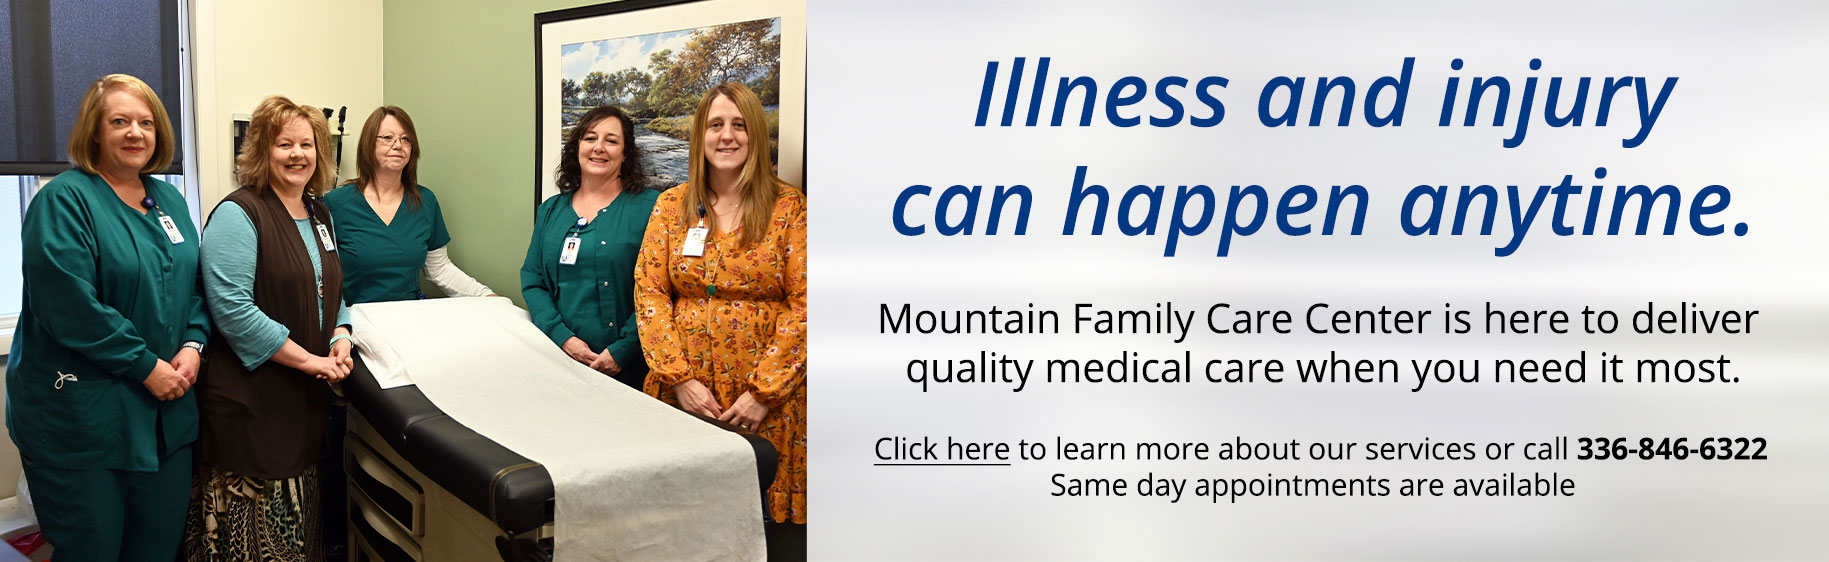 Banner picture of Mountain Family Care Center Staff standing in a patient's room. There is six smiling females.

Banner says:
Illness and injury can happen anytime.
Mountain Family Care Center is here to deliver quality medical care when you need it most.


Click here to learn more about our services or call 336-846-6322
Same day appointments are available